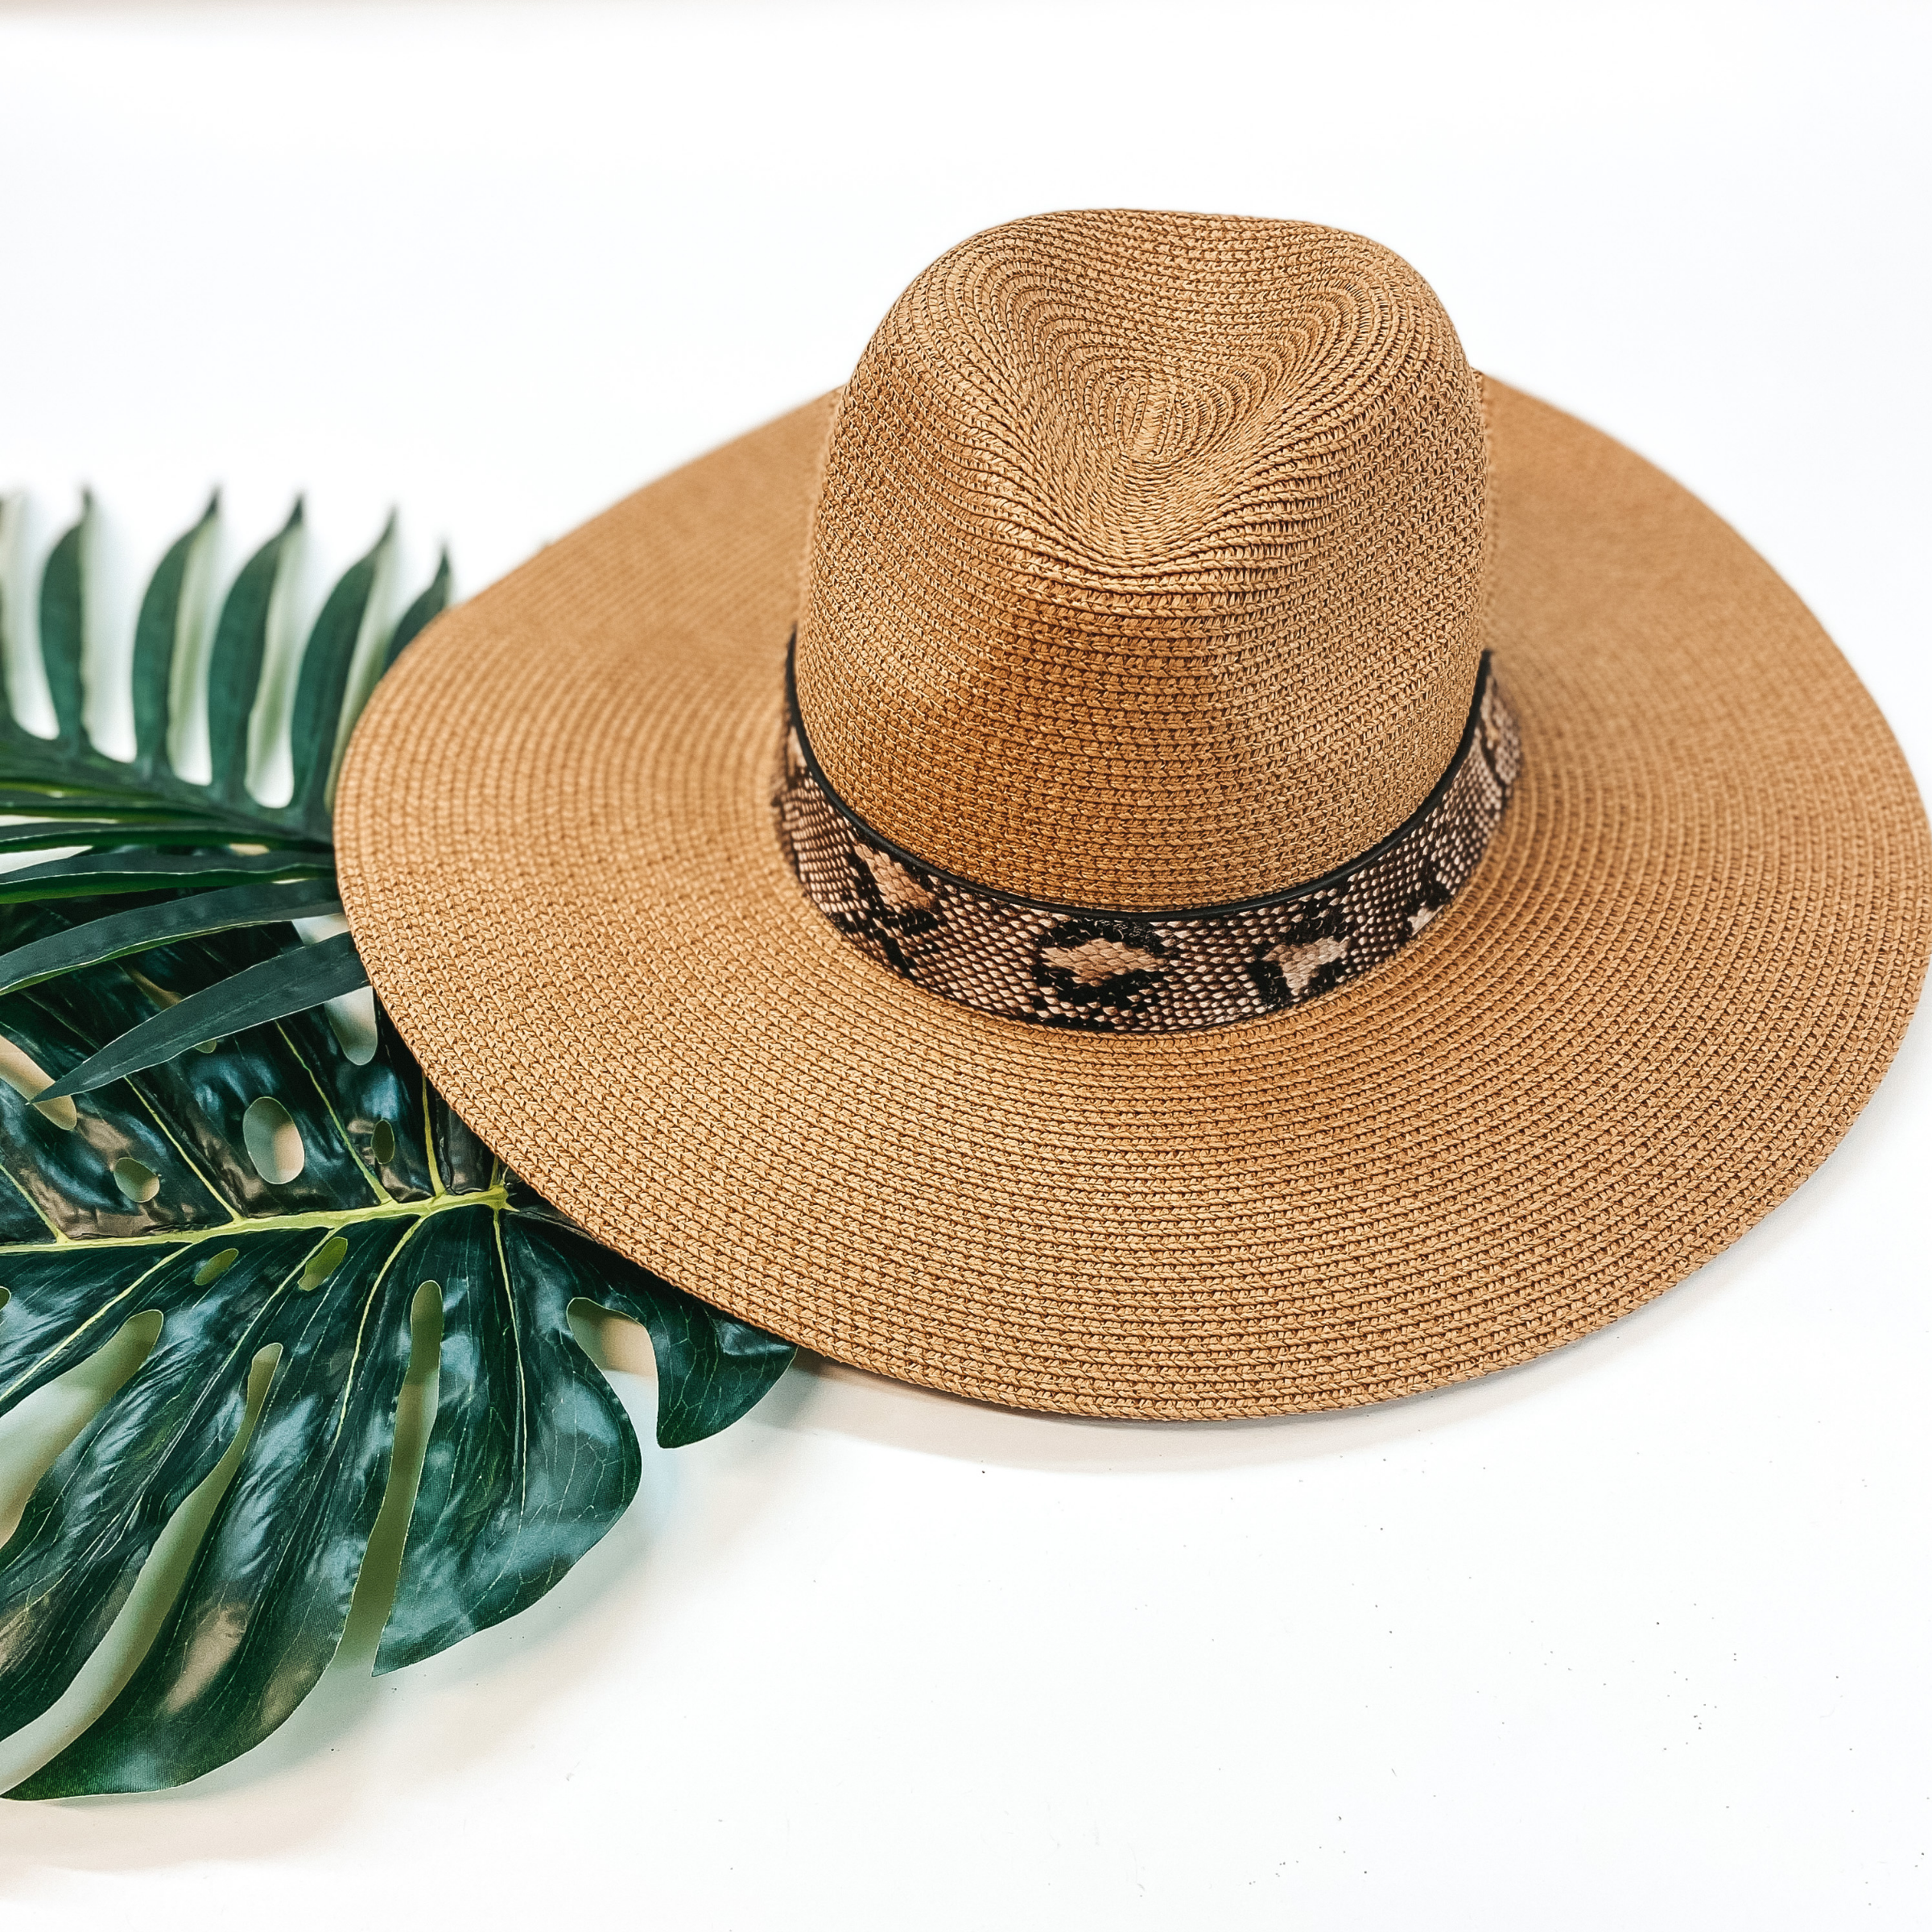 Big Bright Skies Straw Floppy Hat with Snakeskin Band in Tan - Giddy Up Glamour Boutique